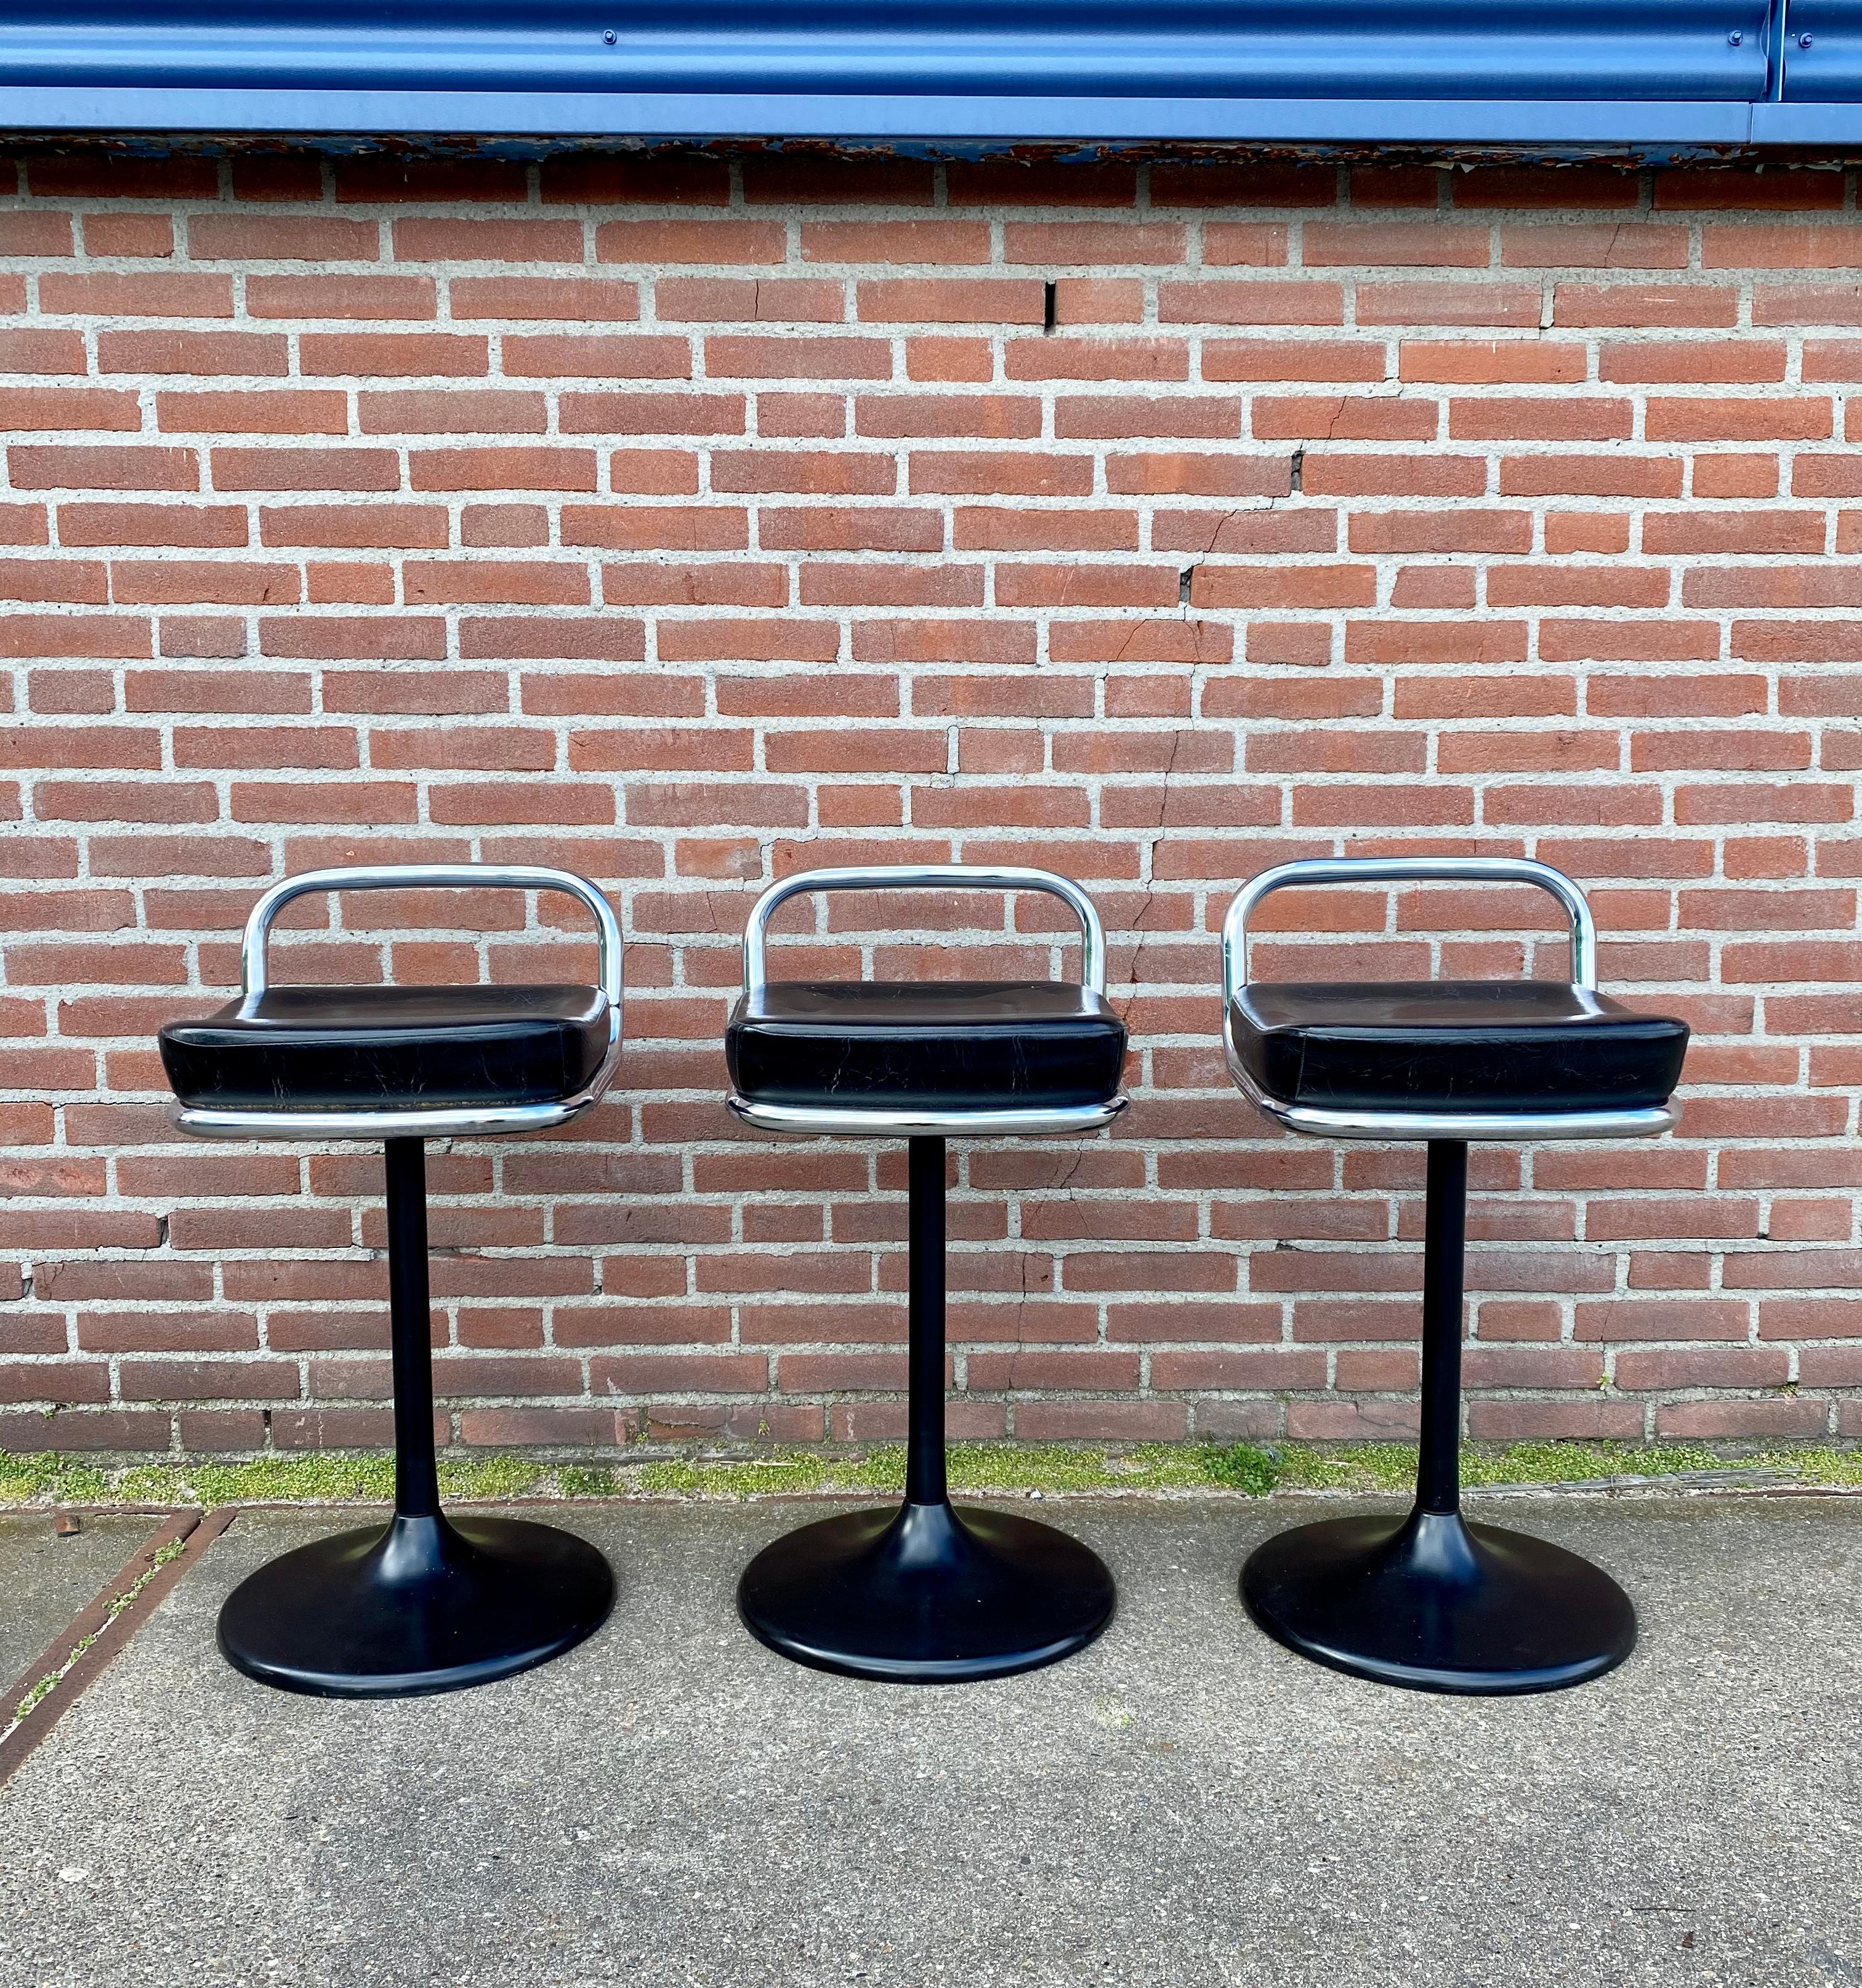 Set of three Postmodern stools featuring an artificial trumpet foot, with a leatherette seating and chromed tubular back. The stools were produced in Germany by Lush in the 1970s. They remain in good condition, with some signs of age and use. 